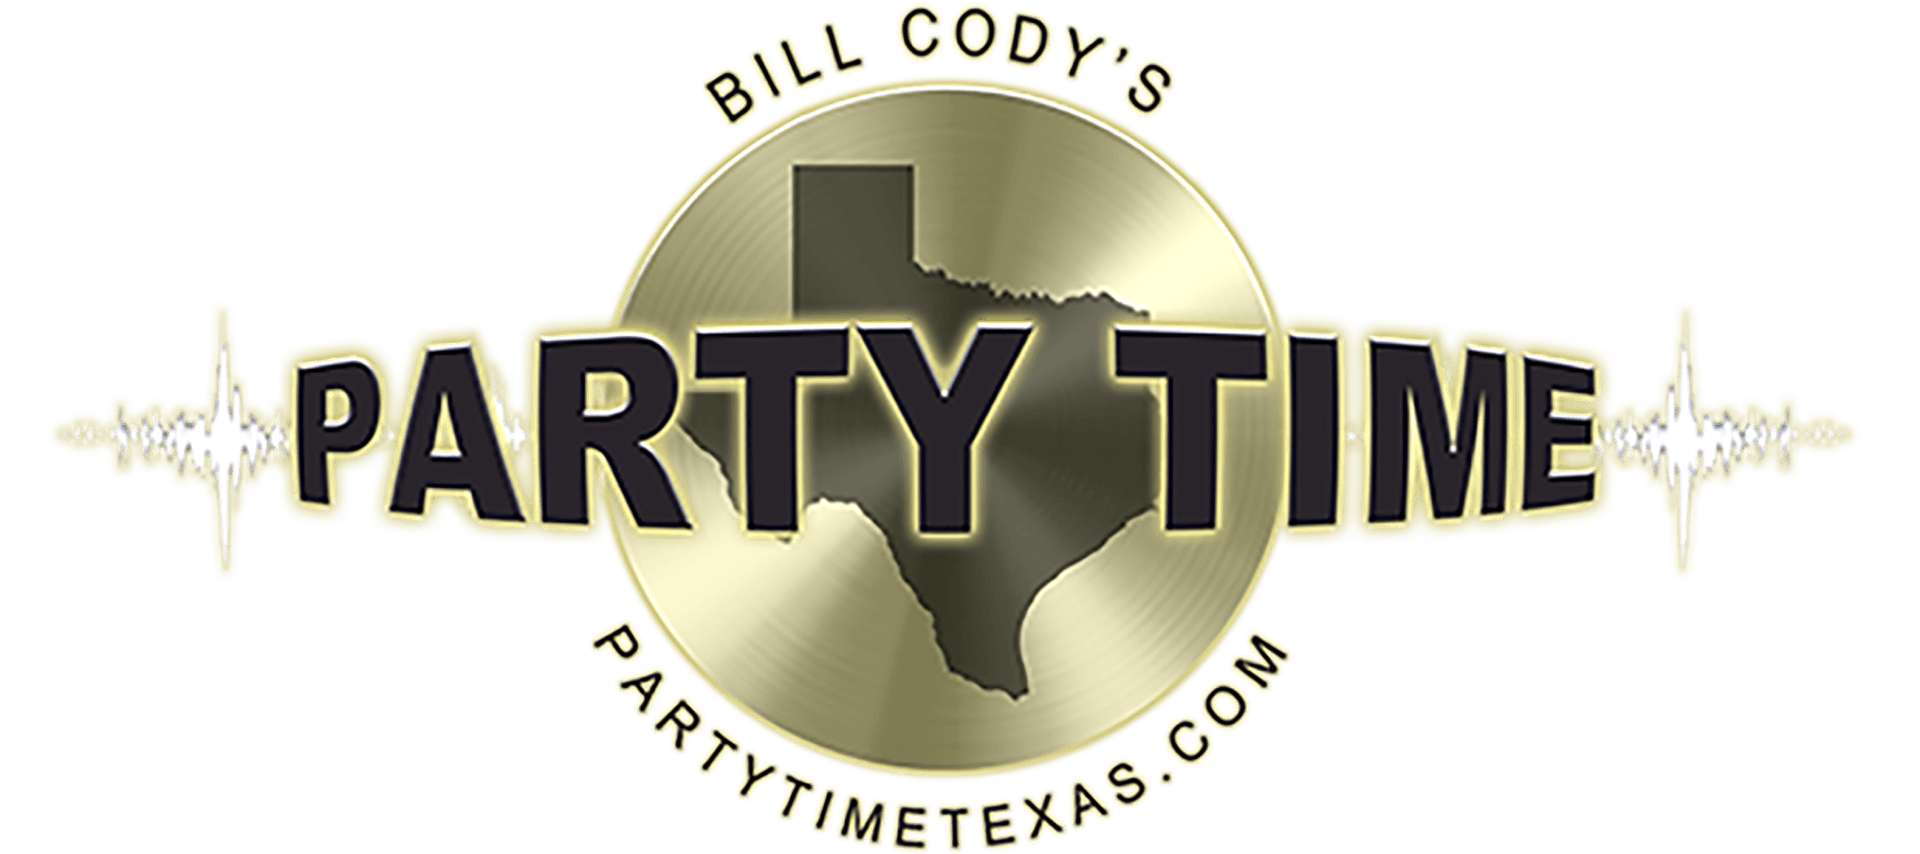 Bill Cody's Party Time